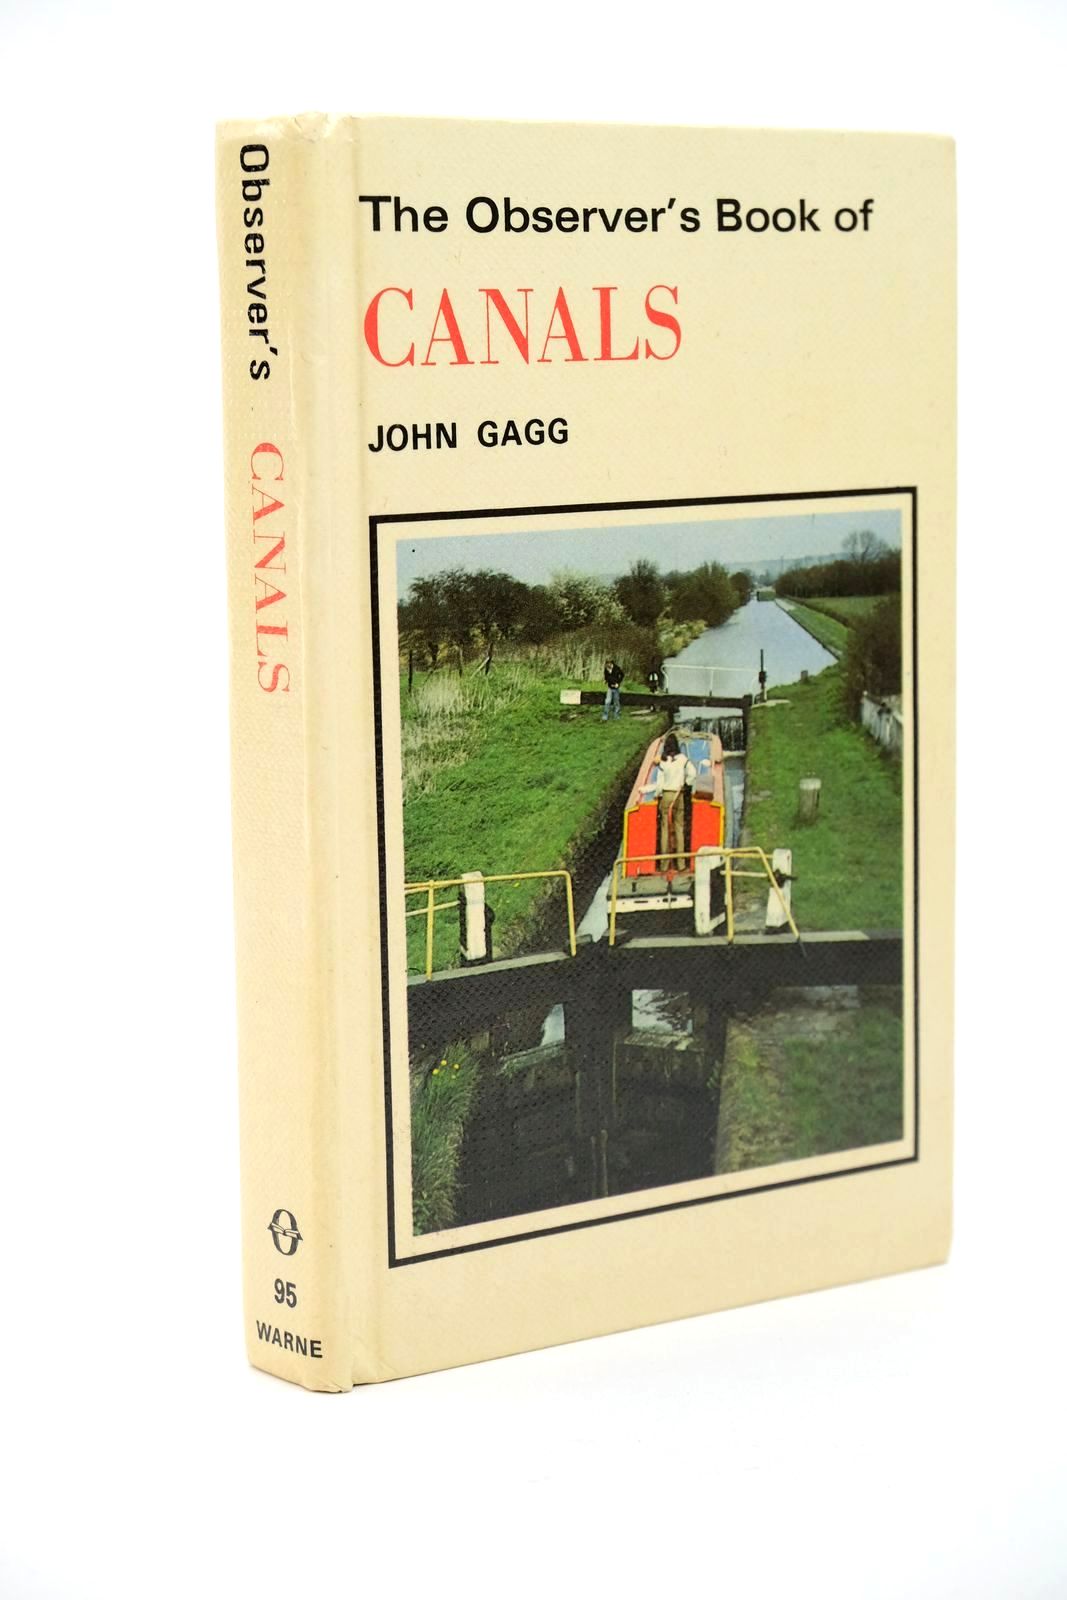 Photo of THE OBSERVER'S BOOK OF CANALS written by Gagg, John illustrated by Wilson, Robert published by Frederick Warne (Publishers) Ltd. (STOCK CODE: 1323053)  for sale by Stella & Rose's Books